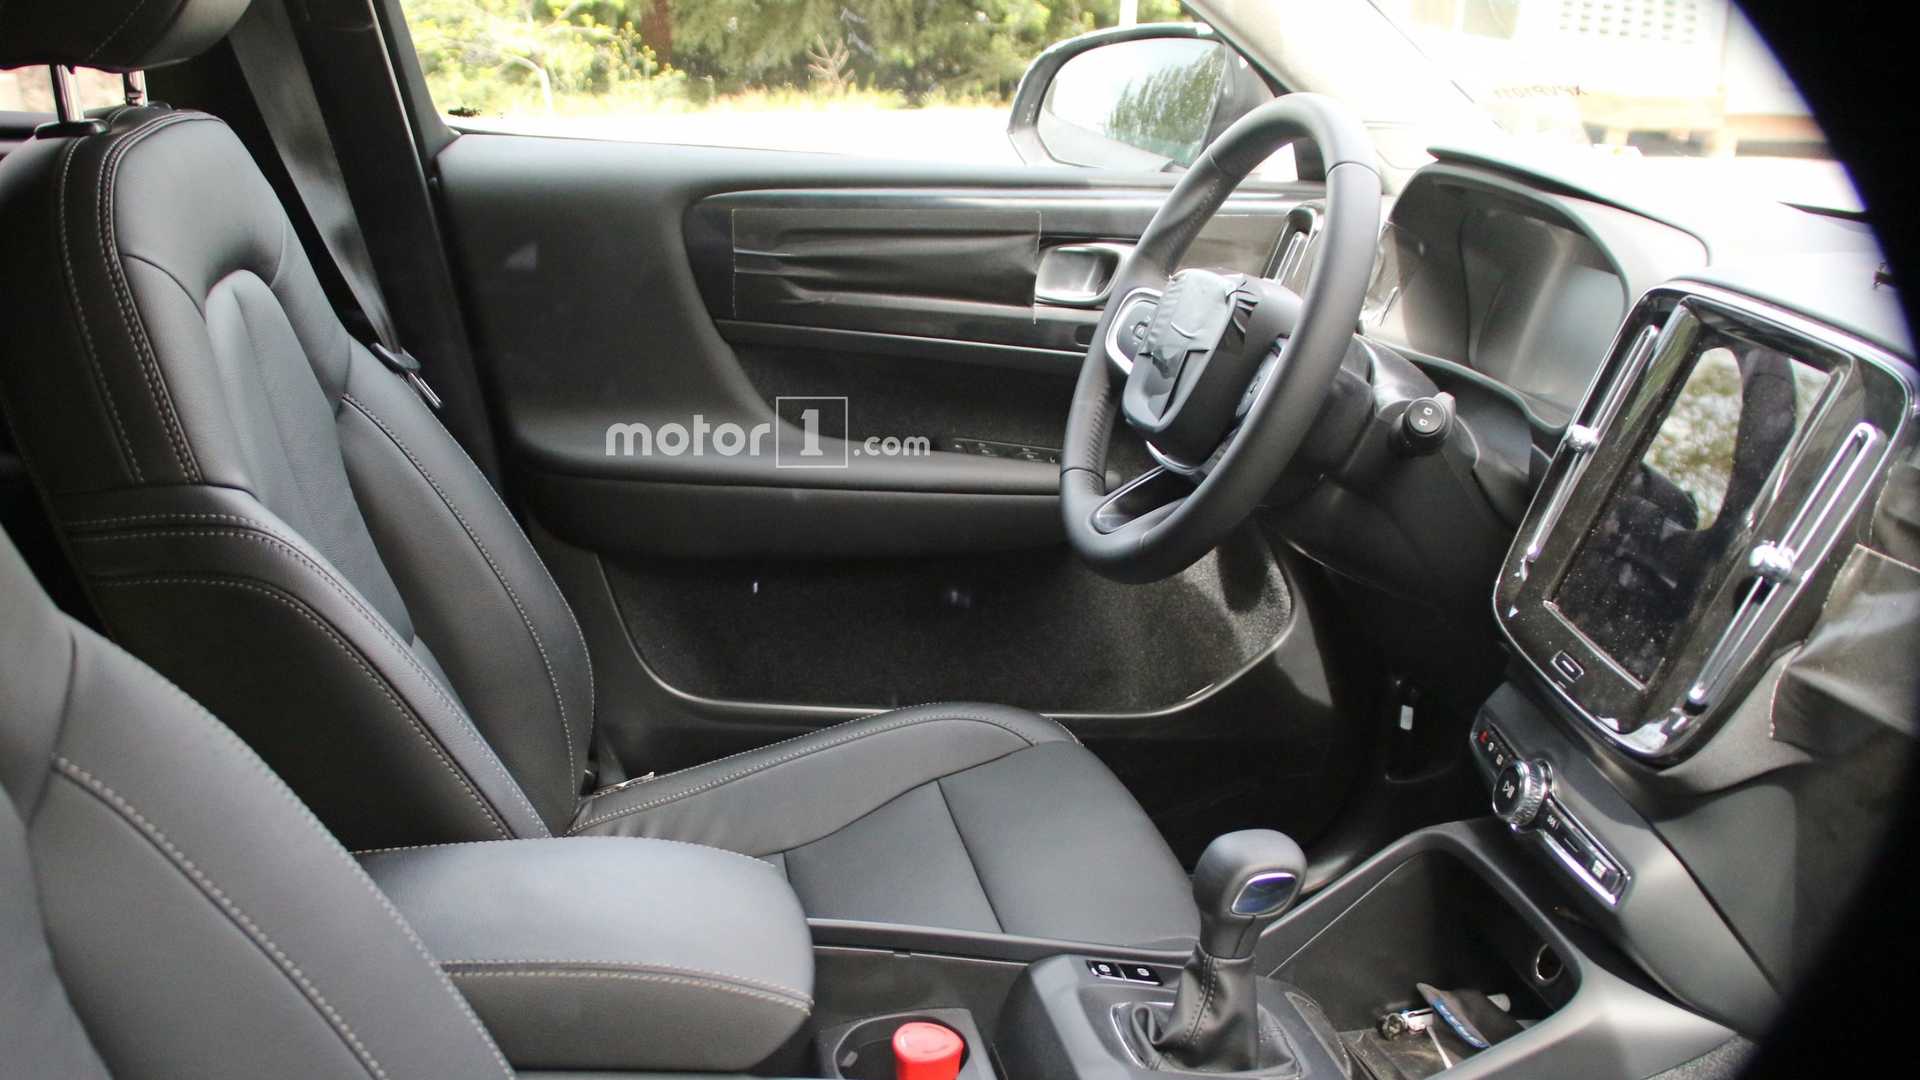 Volvo XC40 Interior Revealed in Spy Shots Ahead of Global Premier by the Year-end